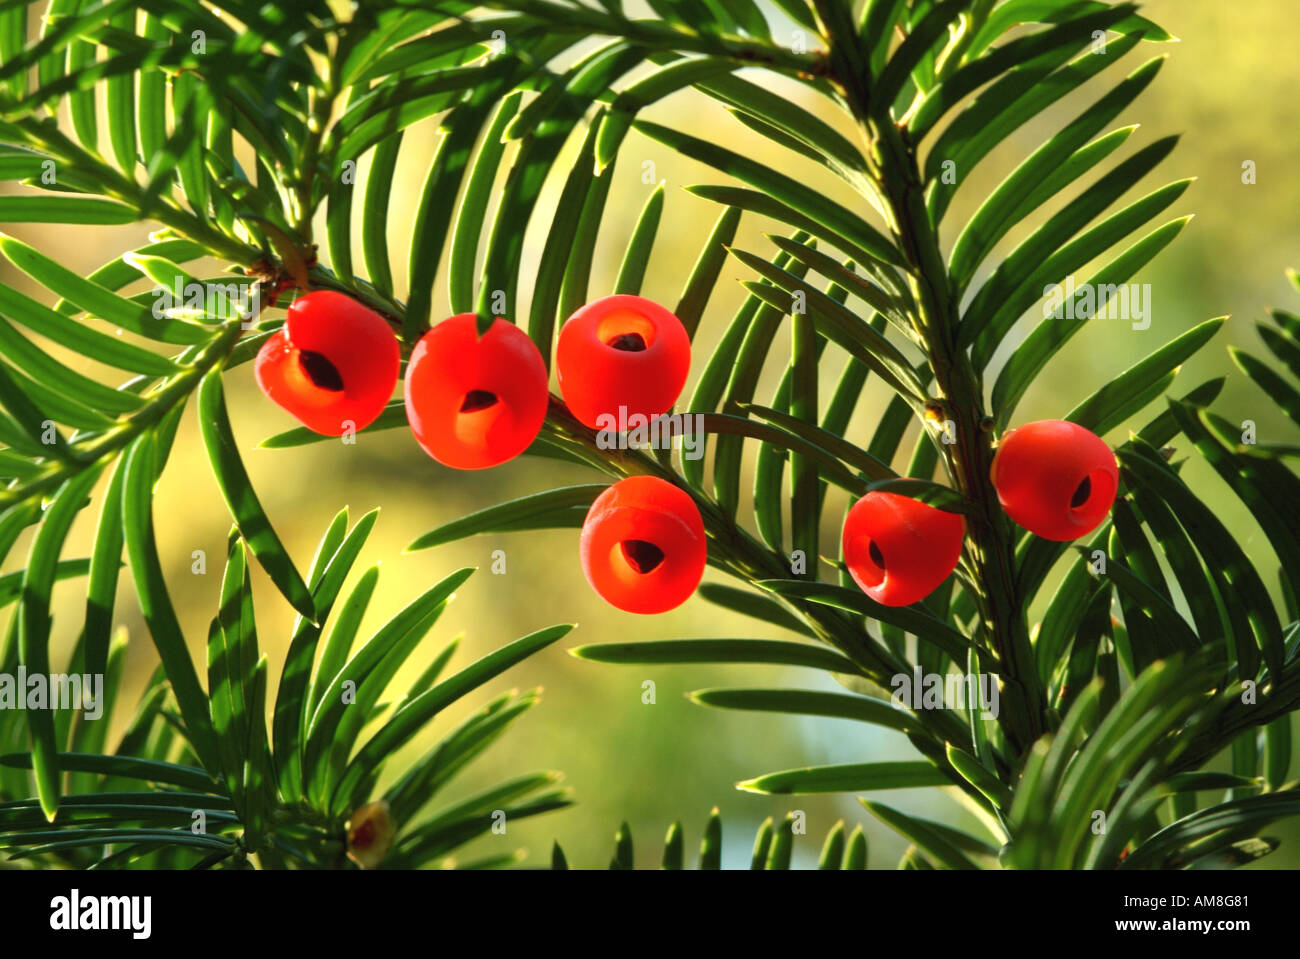 Yew tree red berries on the branch Taxus baccata Stock Photo